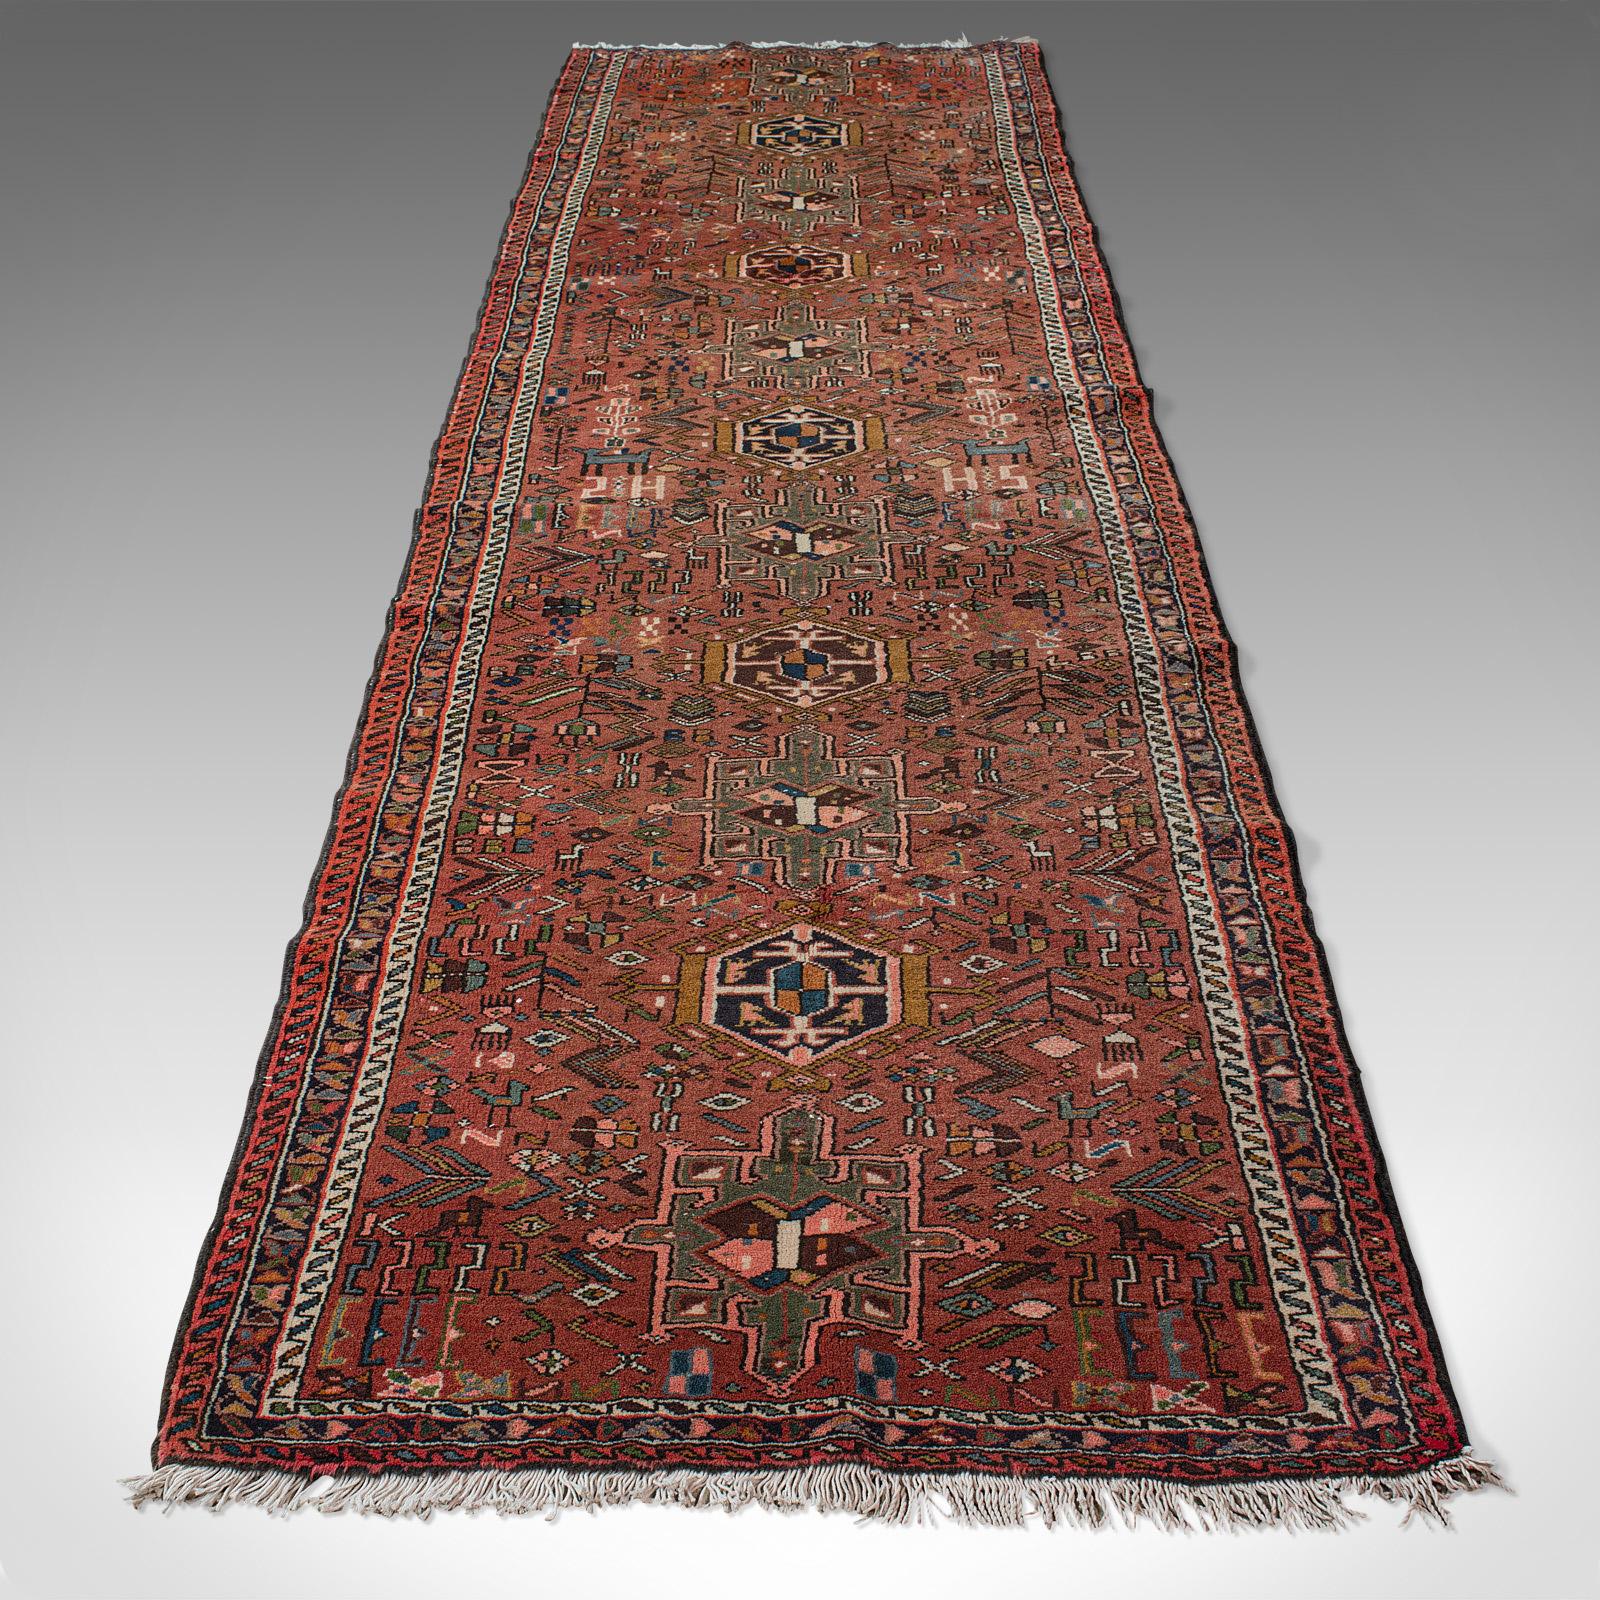 This is a long vintage Karajar runner. A Persian, woven entrance hall carpet, dating to the early 20th century, circa 1930.

Of great length for the hallway at 105cm x 395cm (41.25